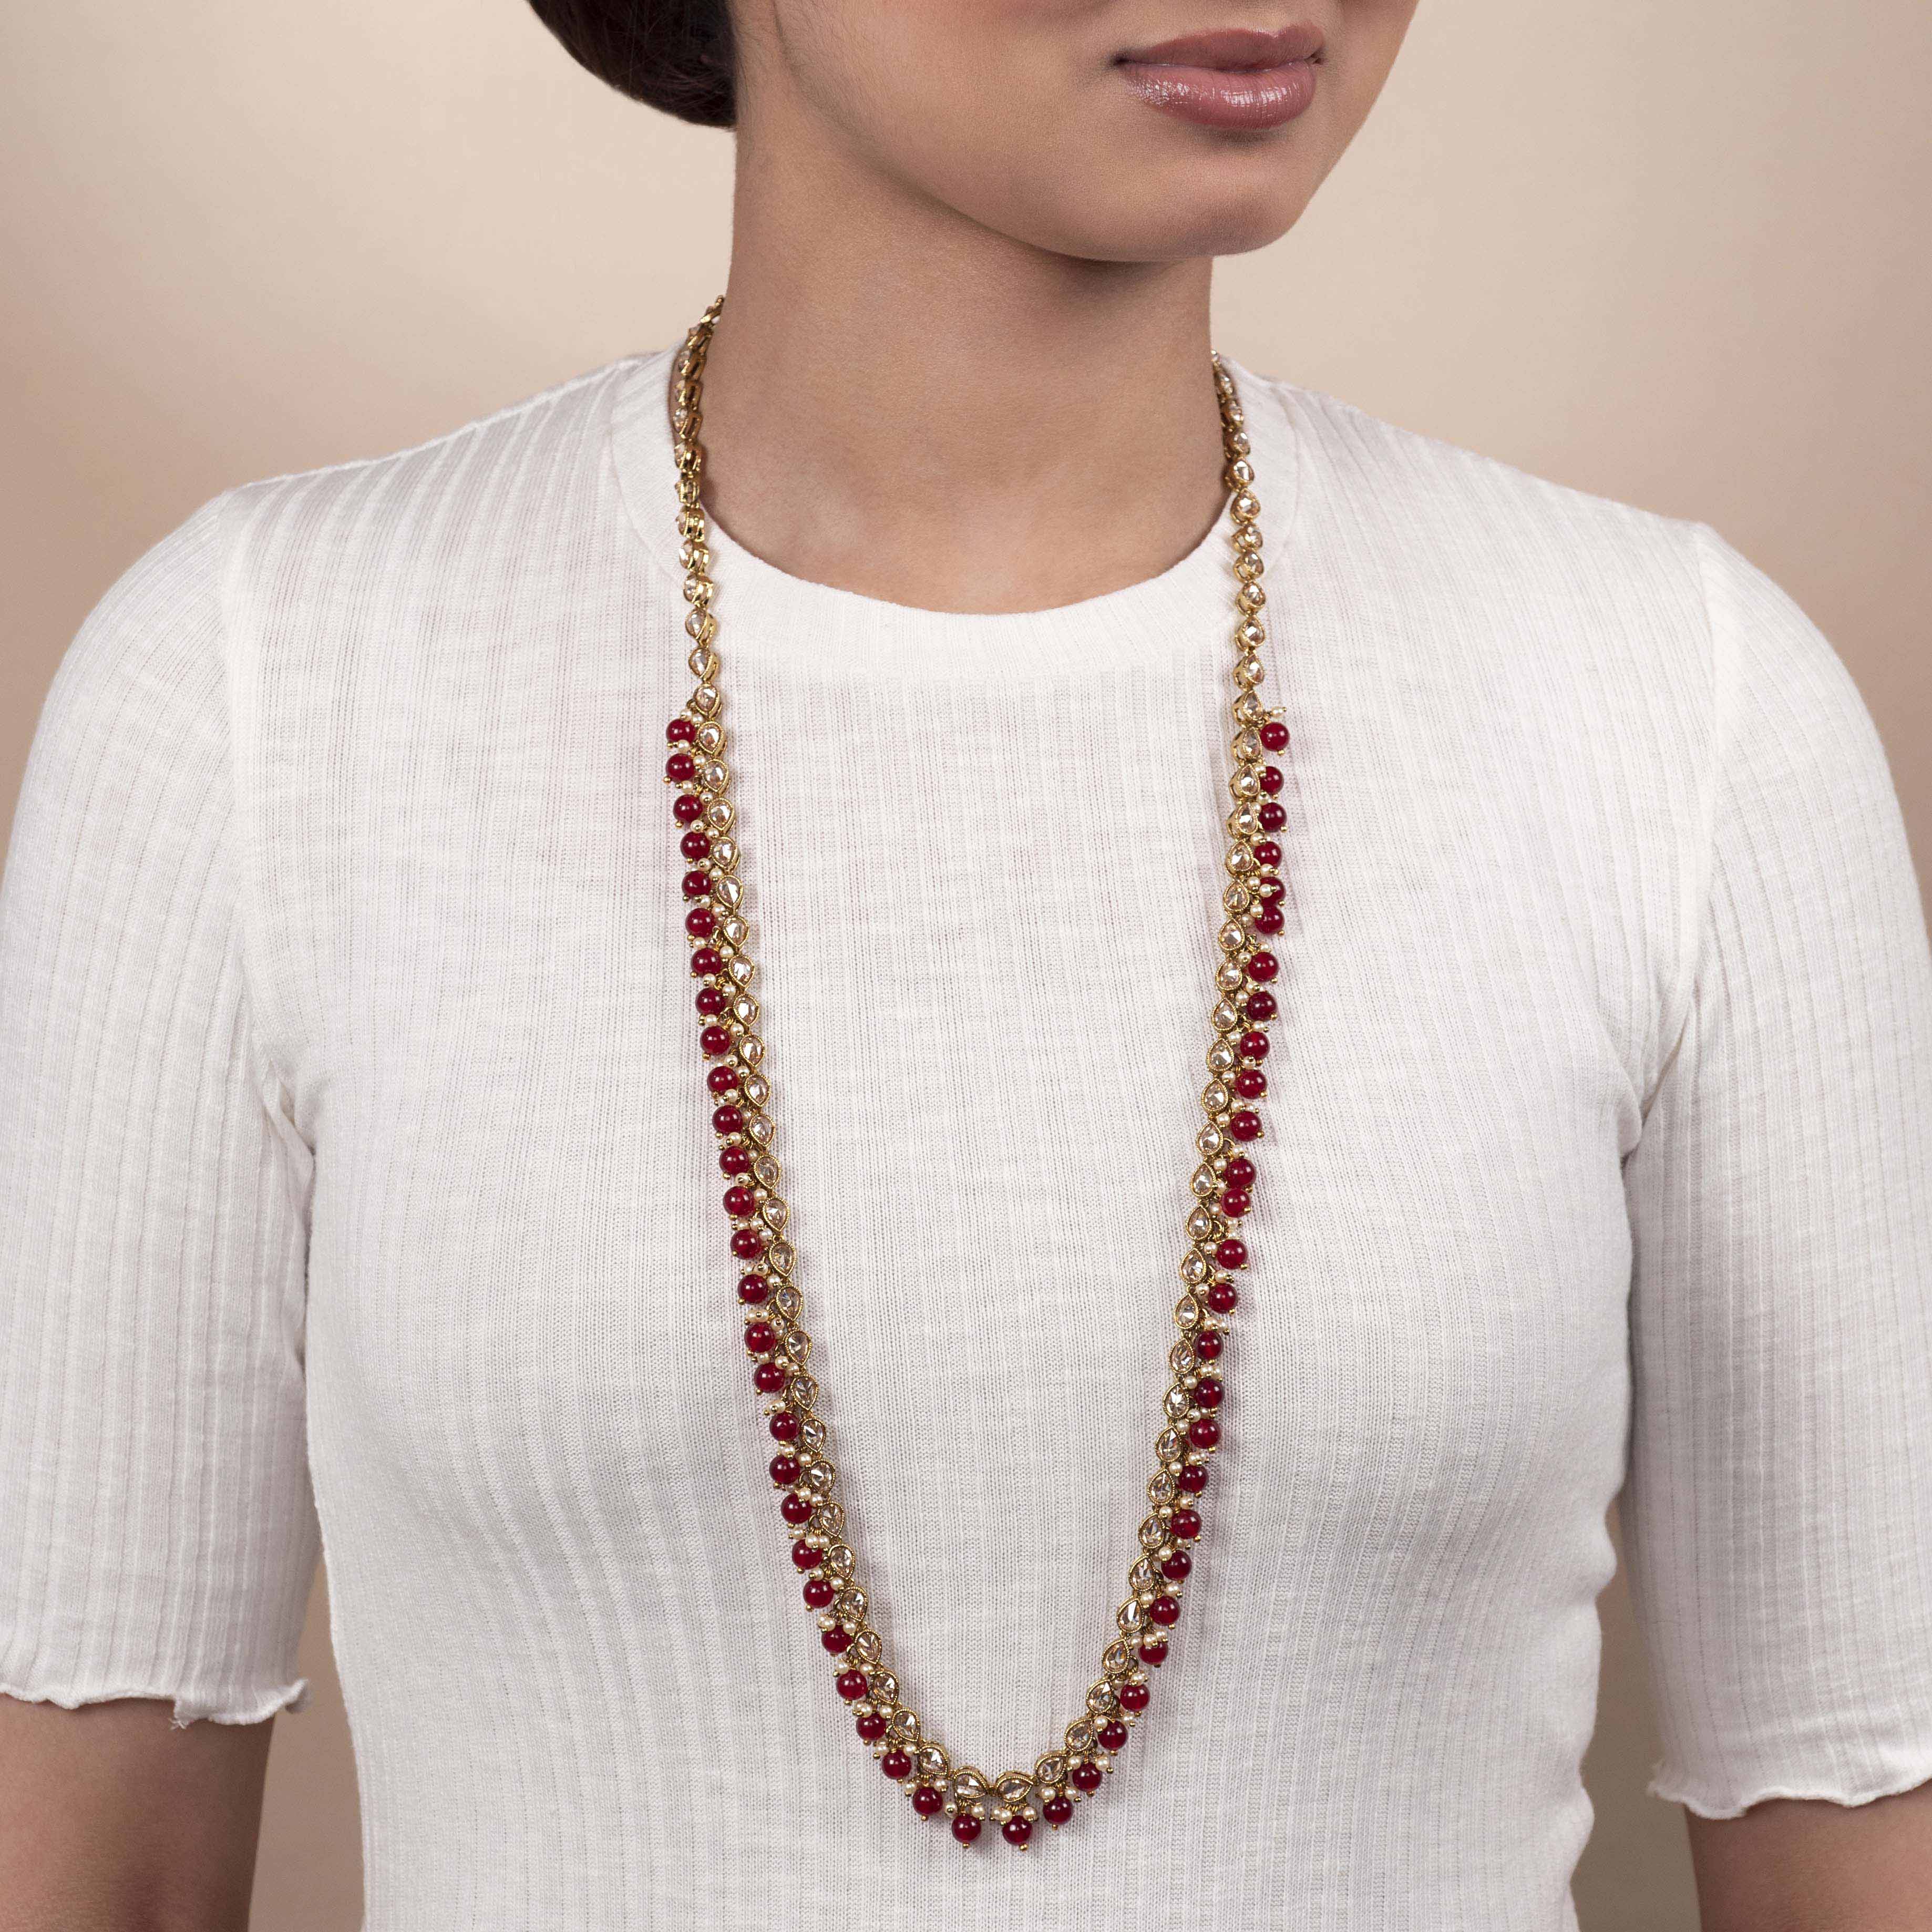 Antique Gold and Maroon Long Chain